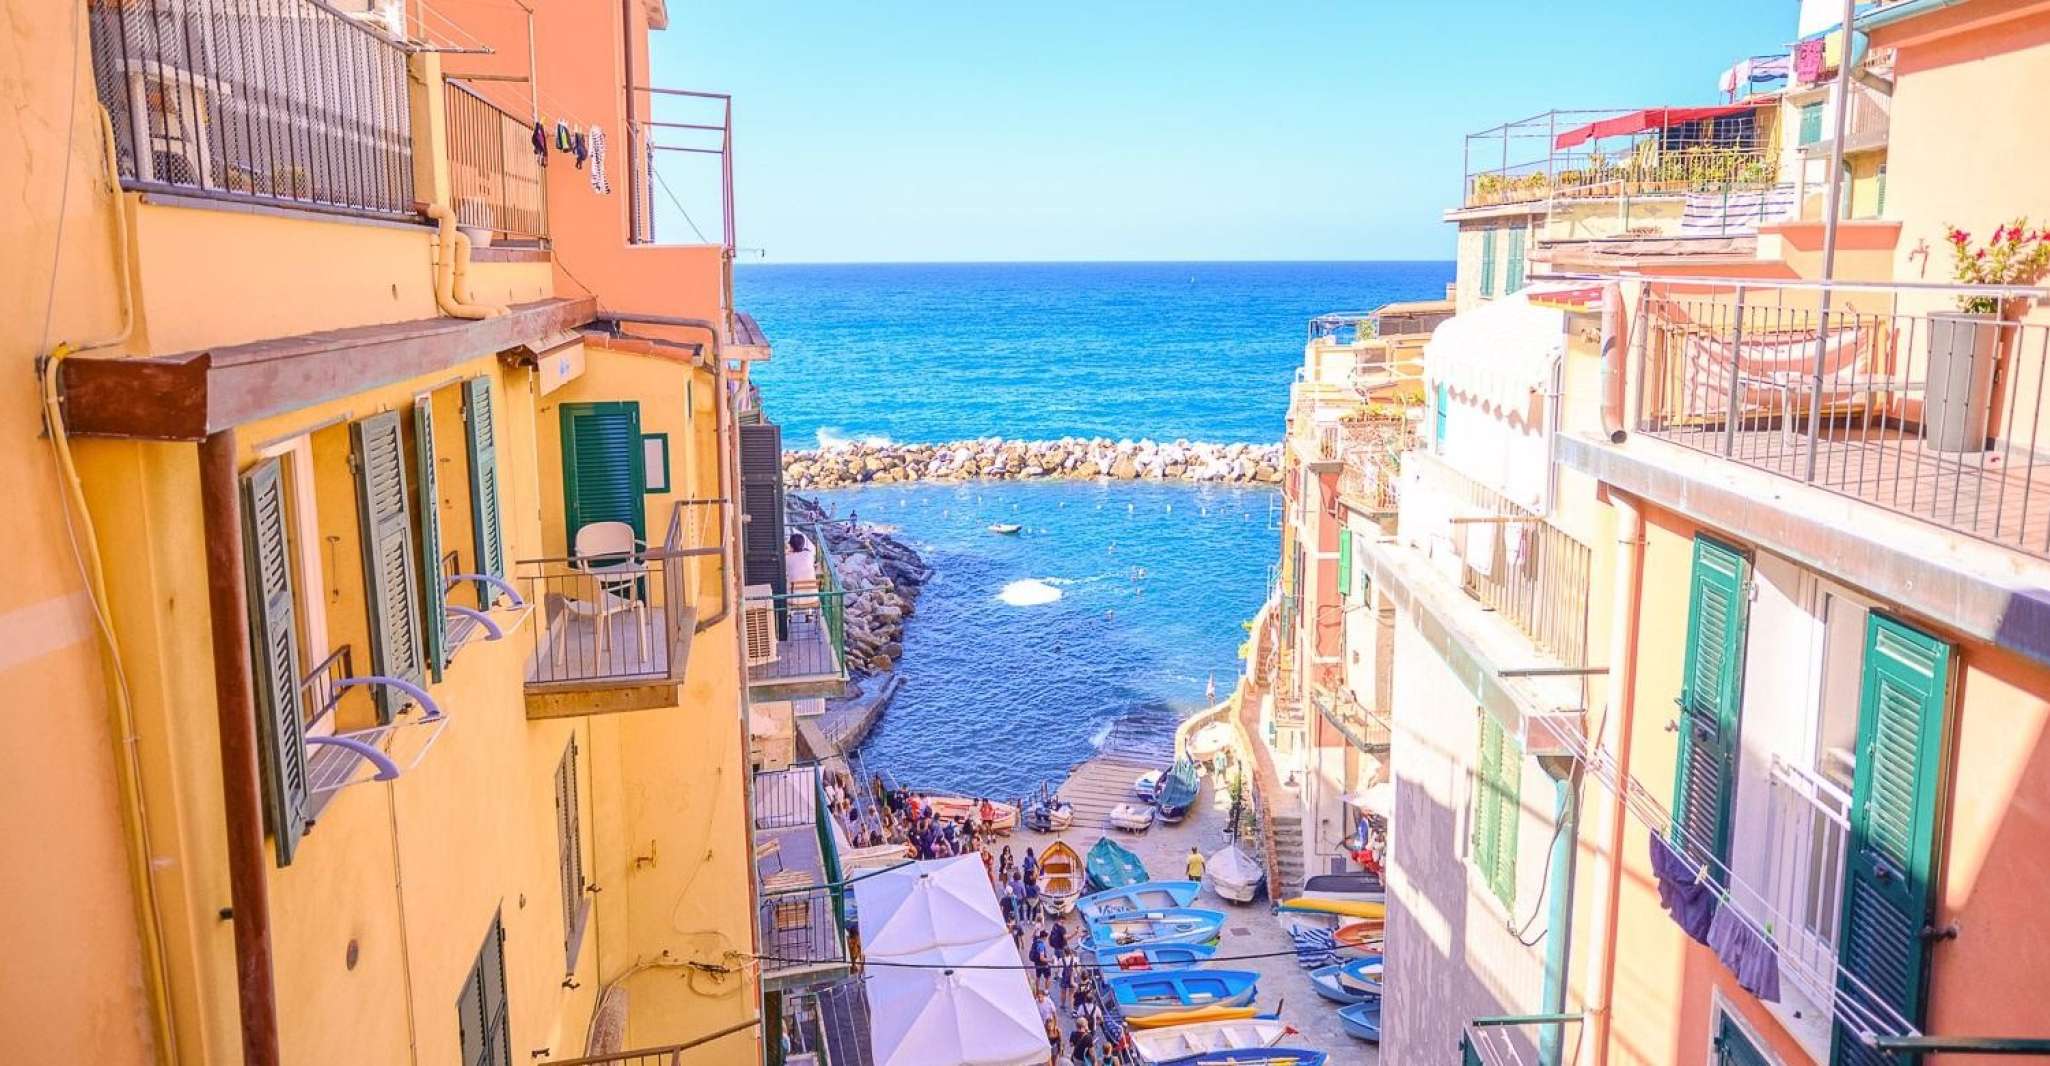 From Montecatini, Full-Day Excursion to Cinque Terre - Housity